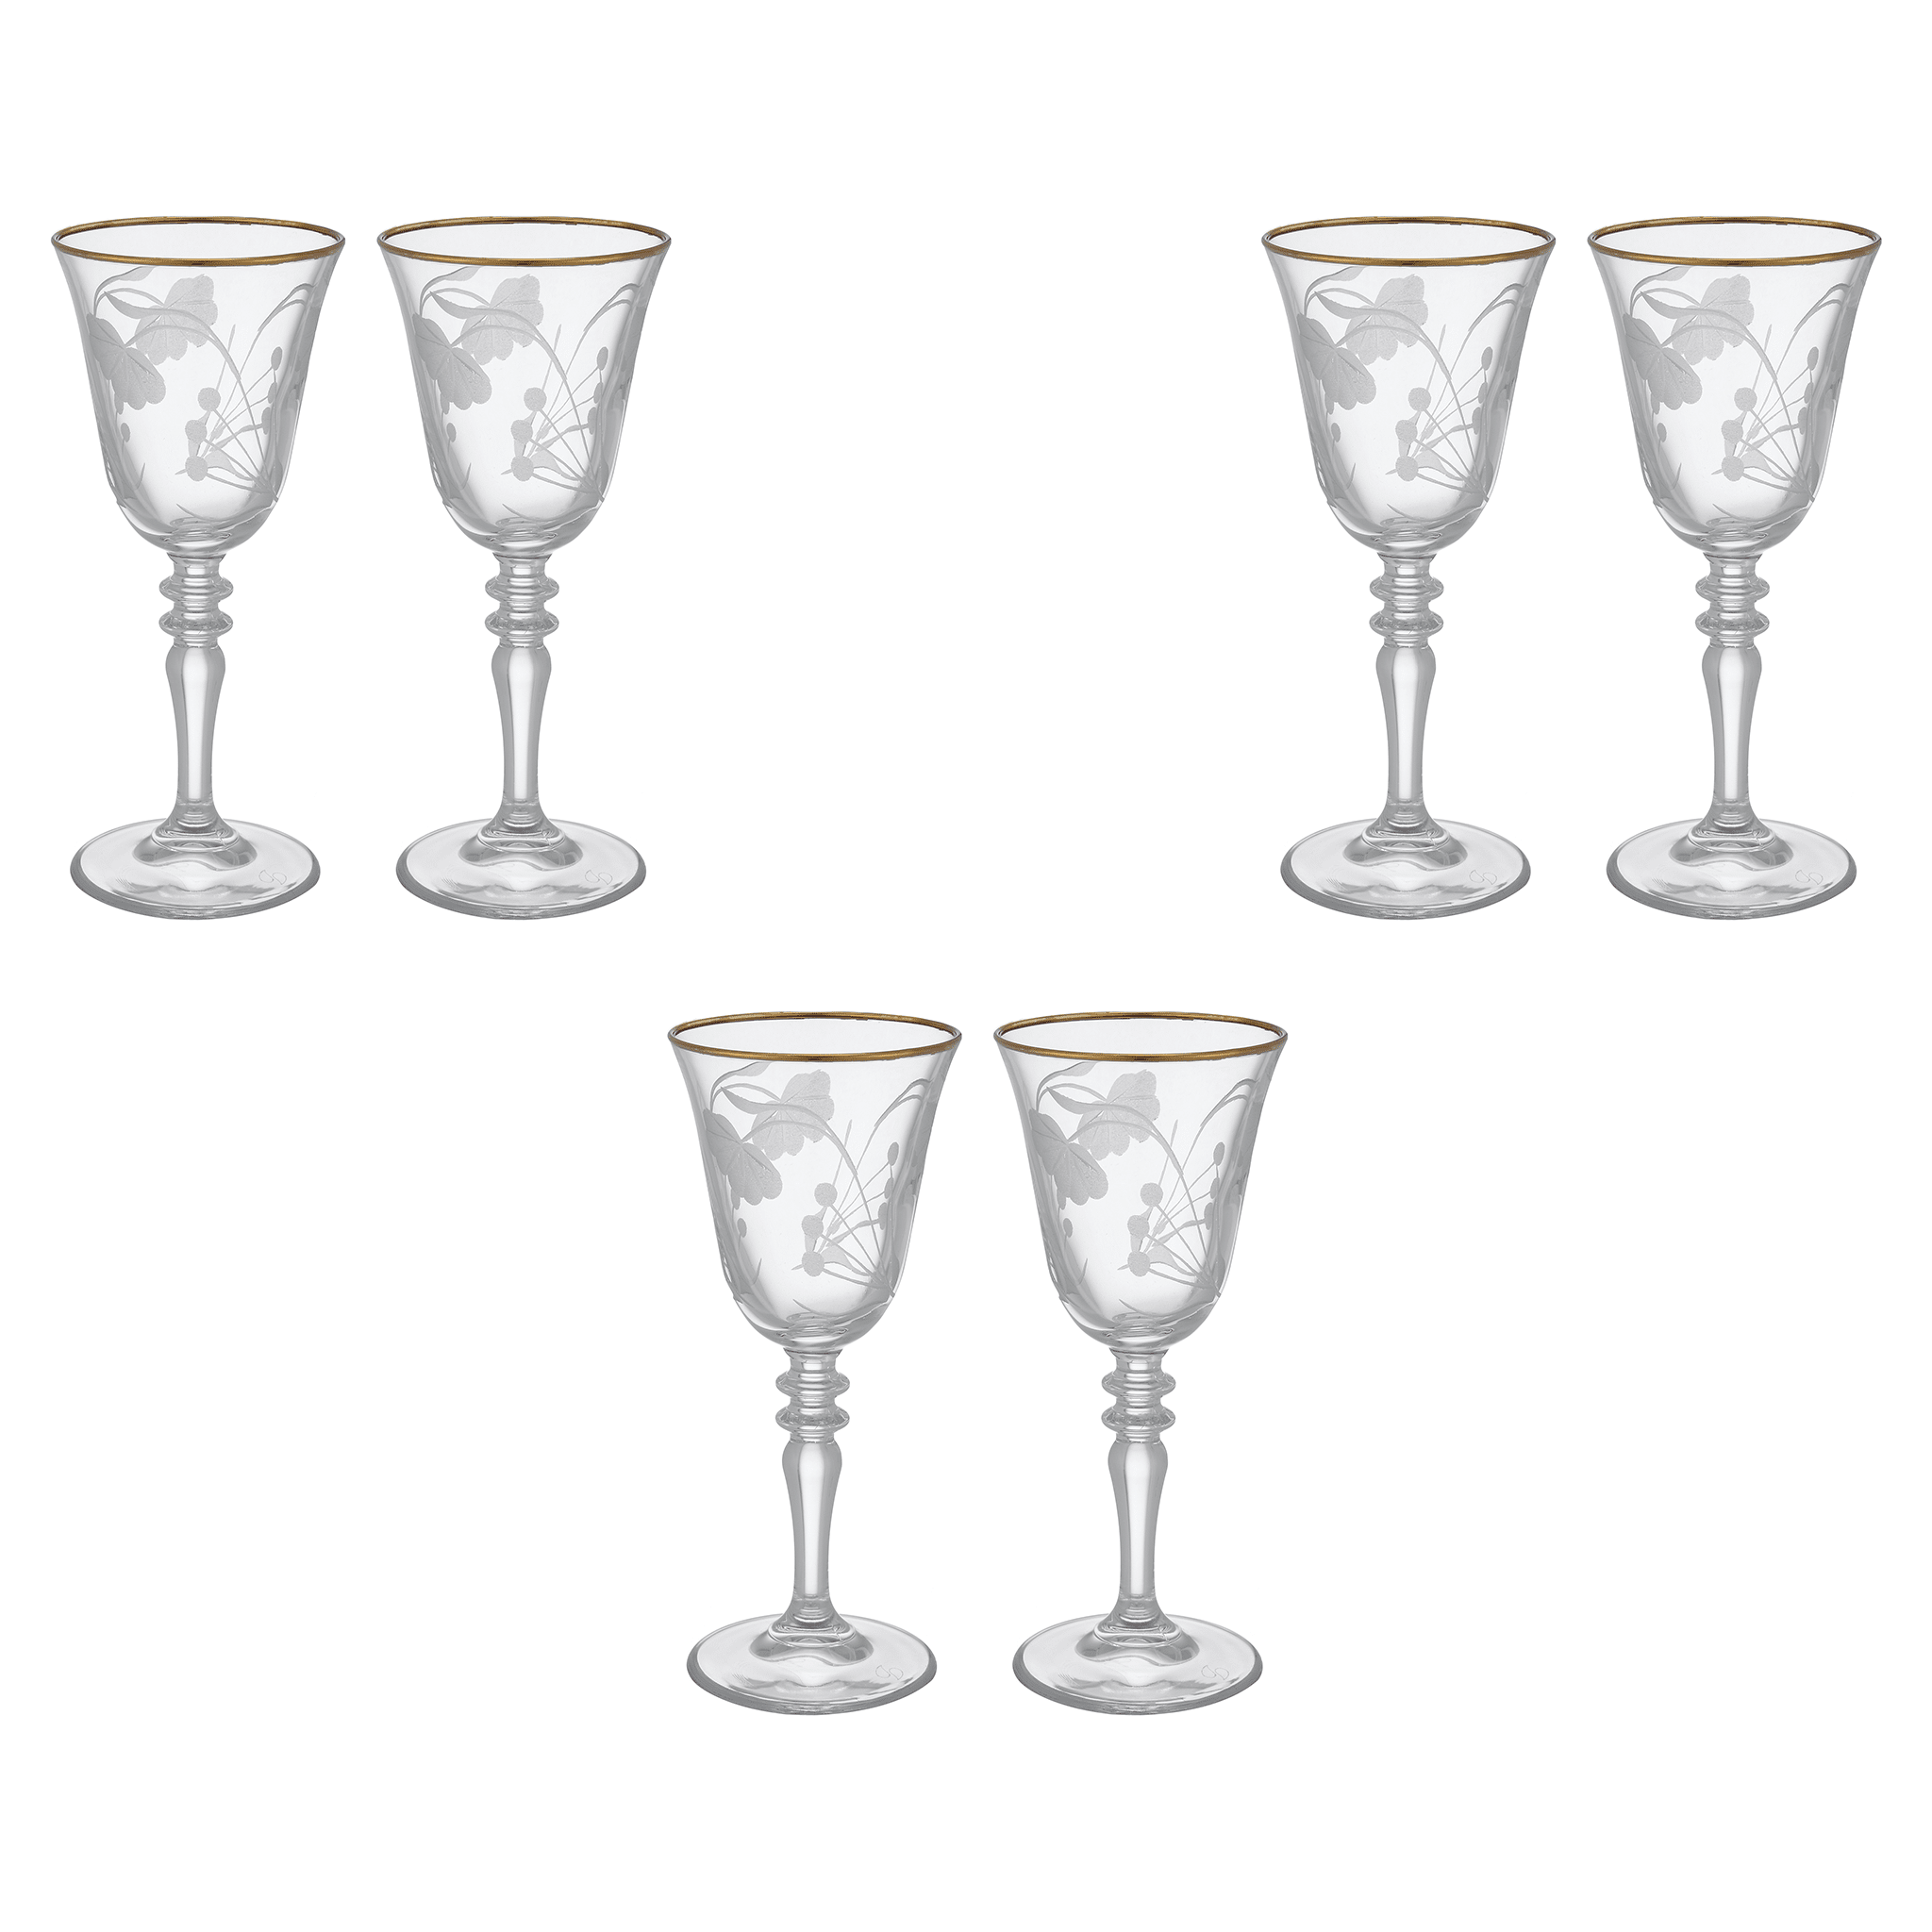 Pasabahce - Decorated Glass Set 6 Pieces - Gold - 200ml - Glass - 390005042